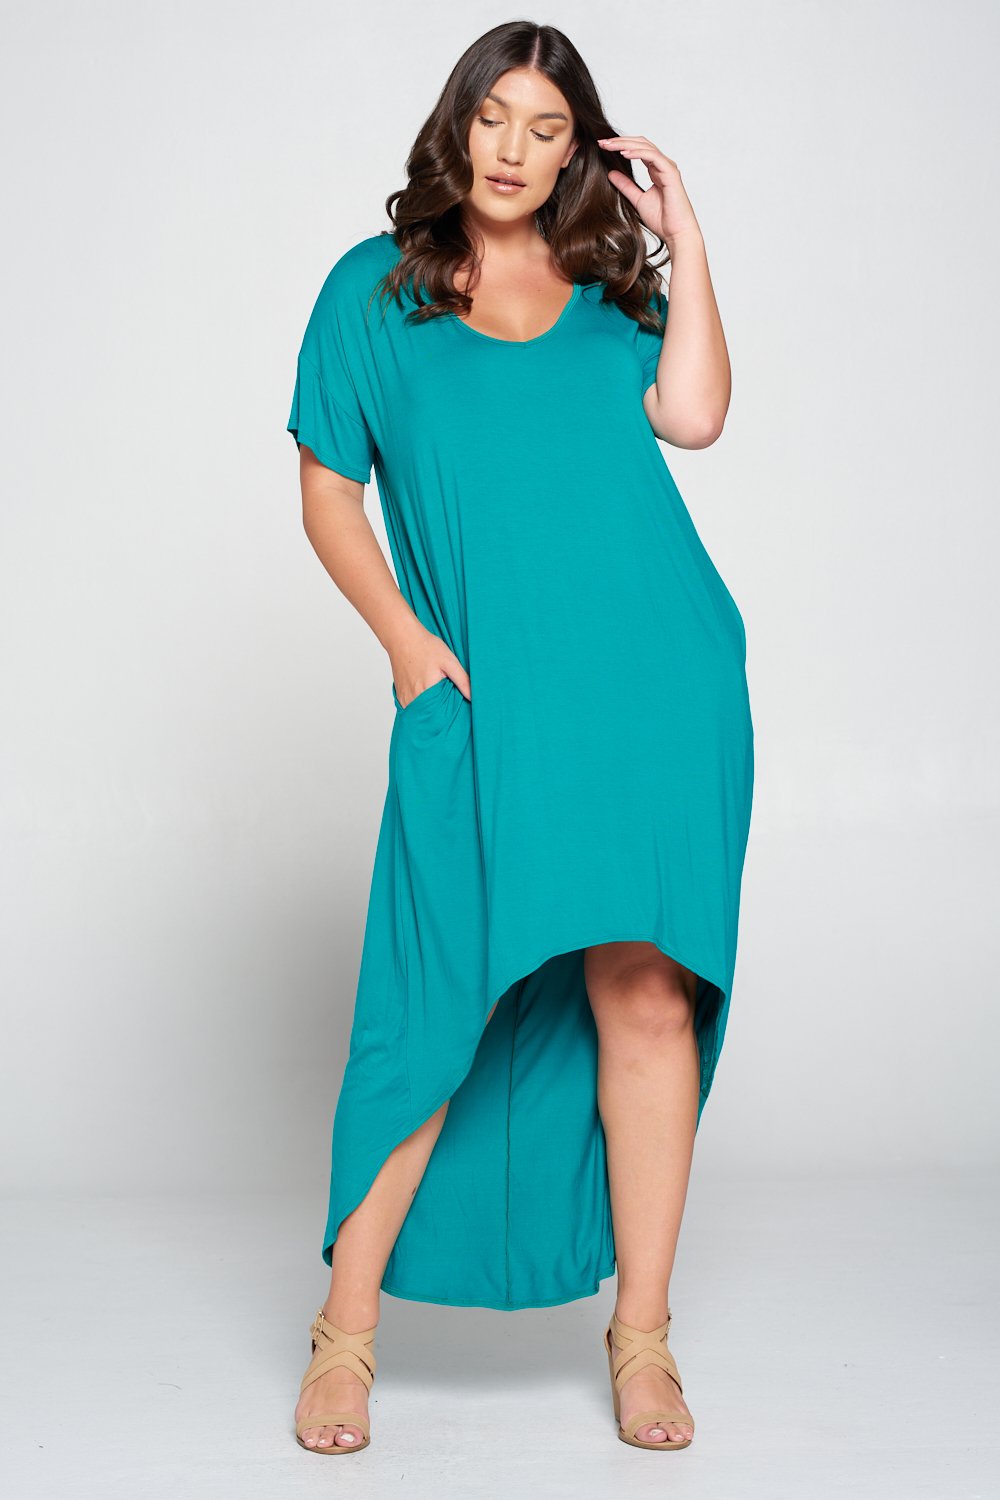 livd L I V D women's contemporary plus size clothing high low hi lo dress with pockets v neck sleeves in jade